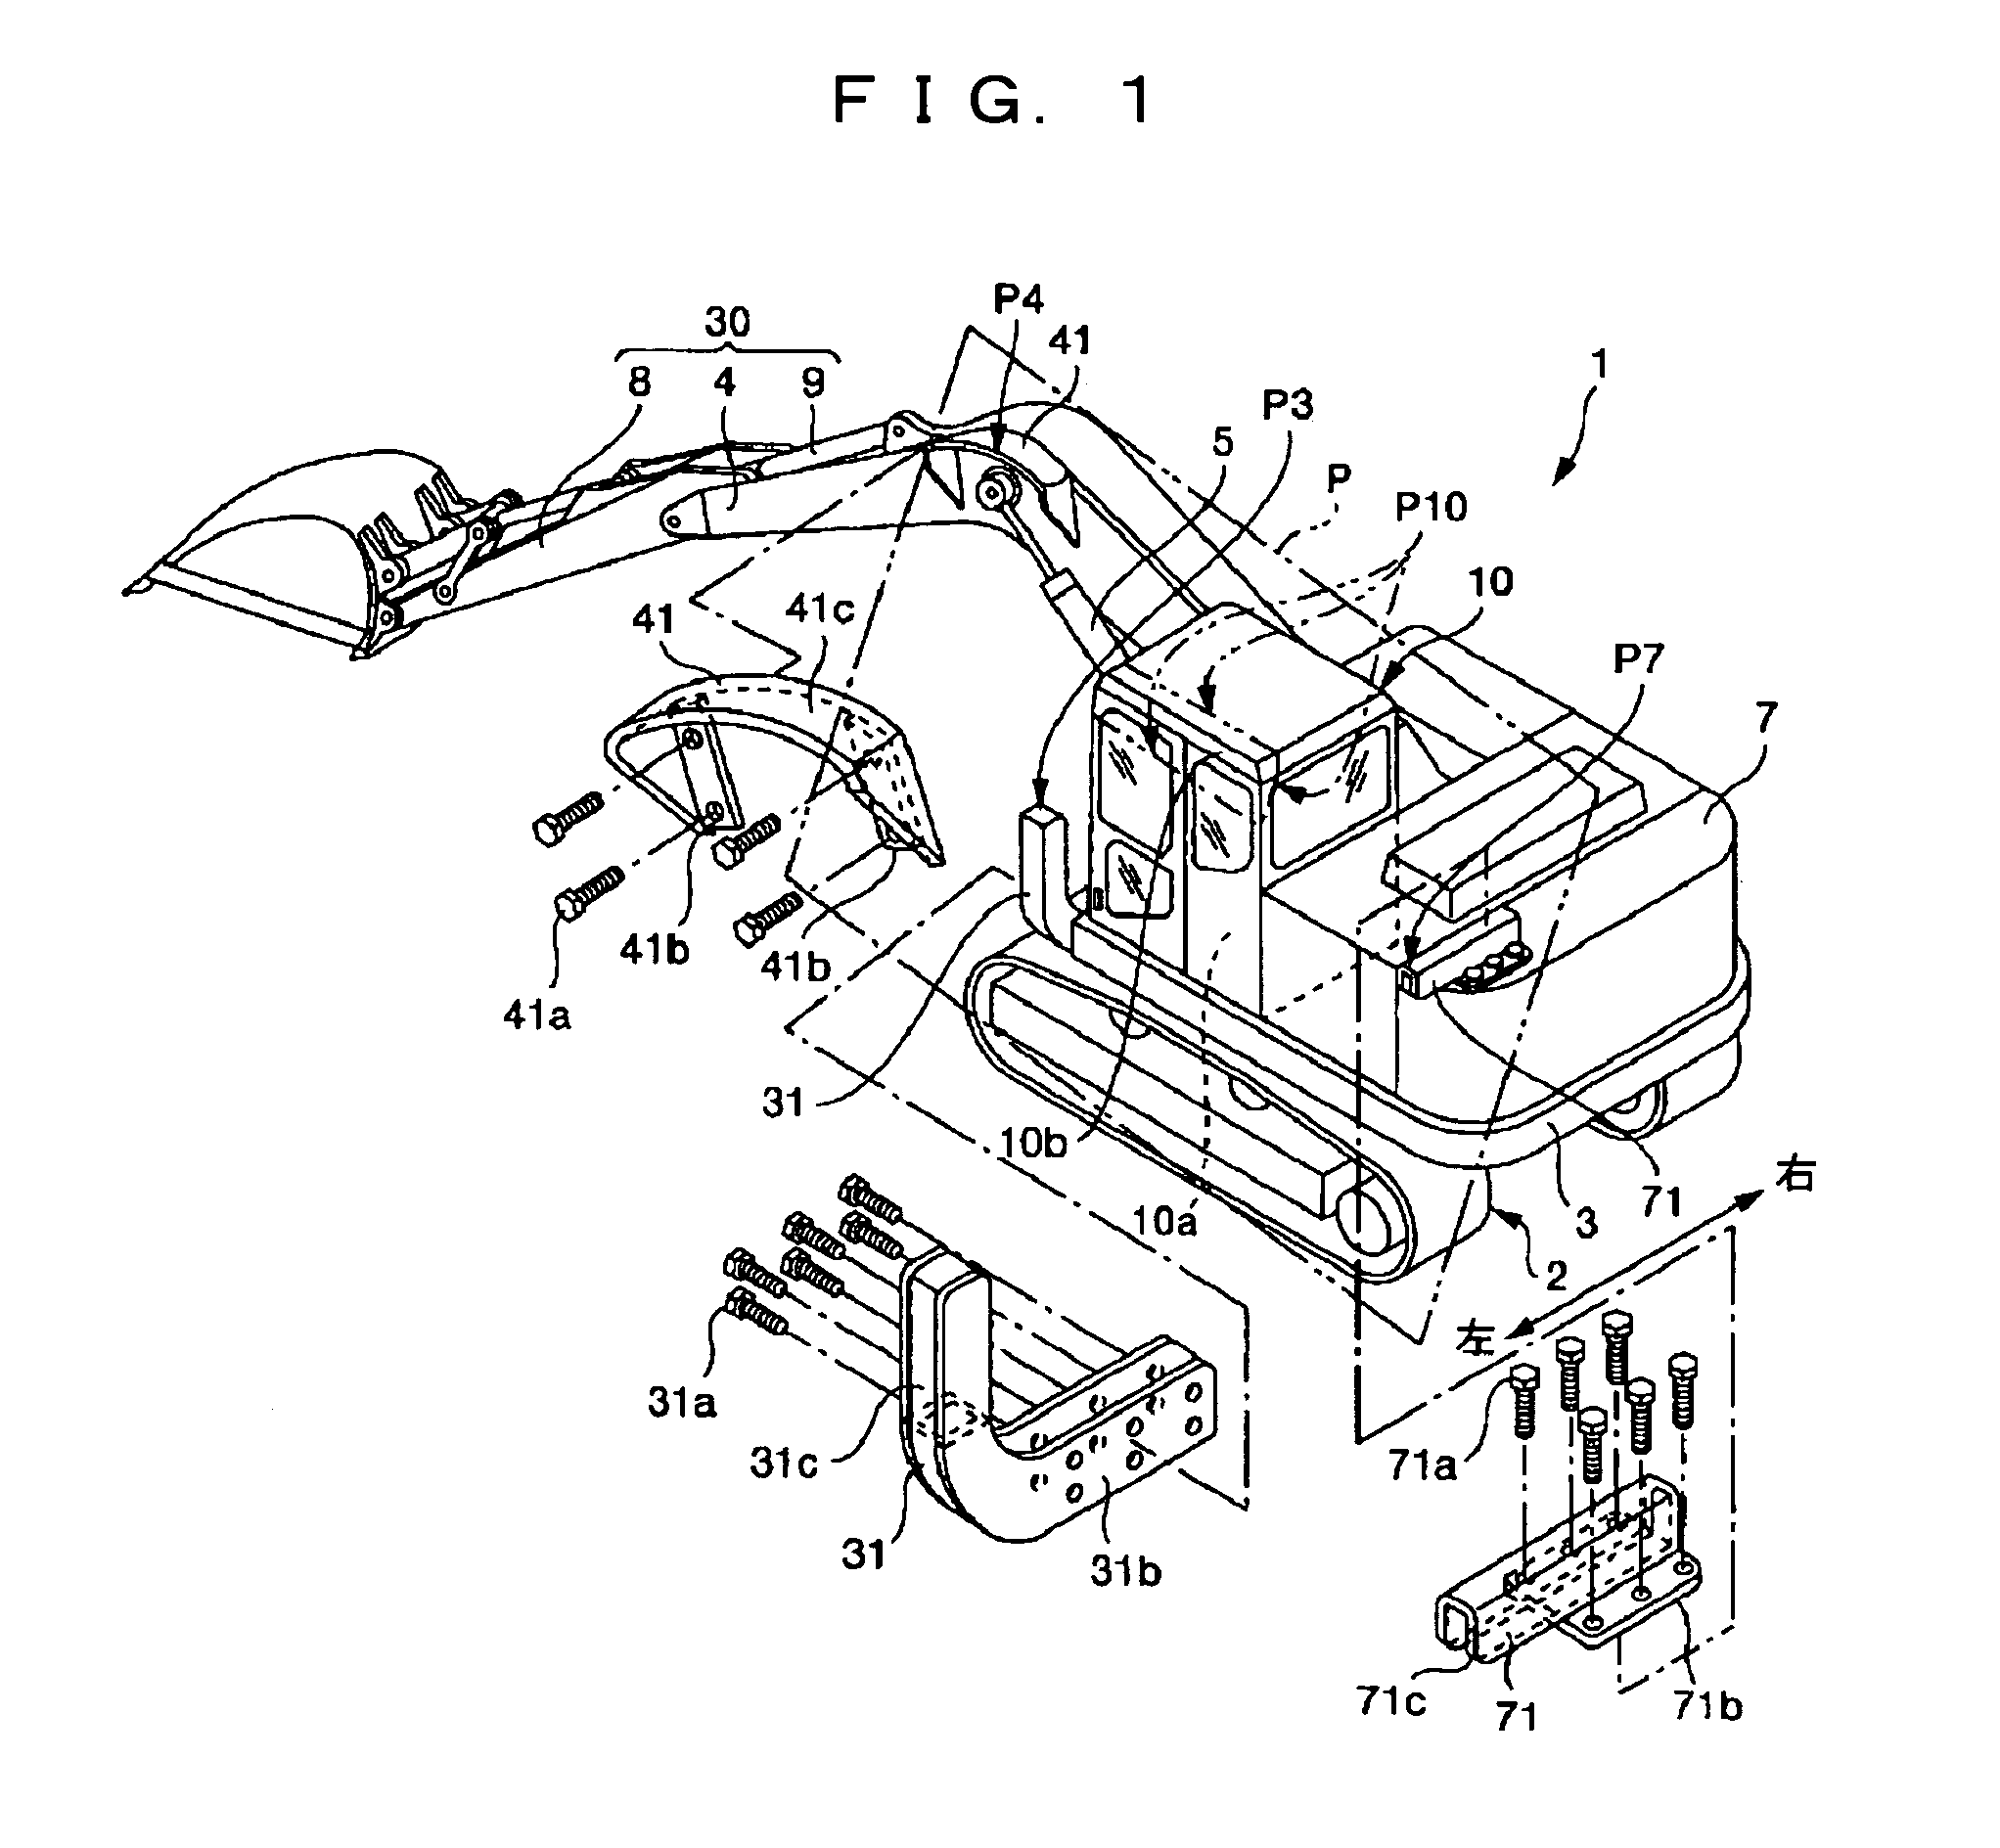 Construction machine and projecting object of the same